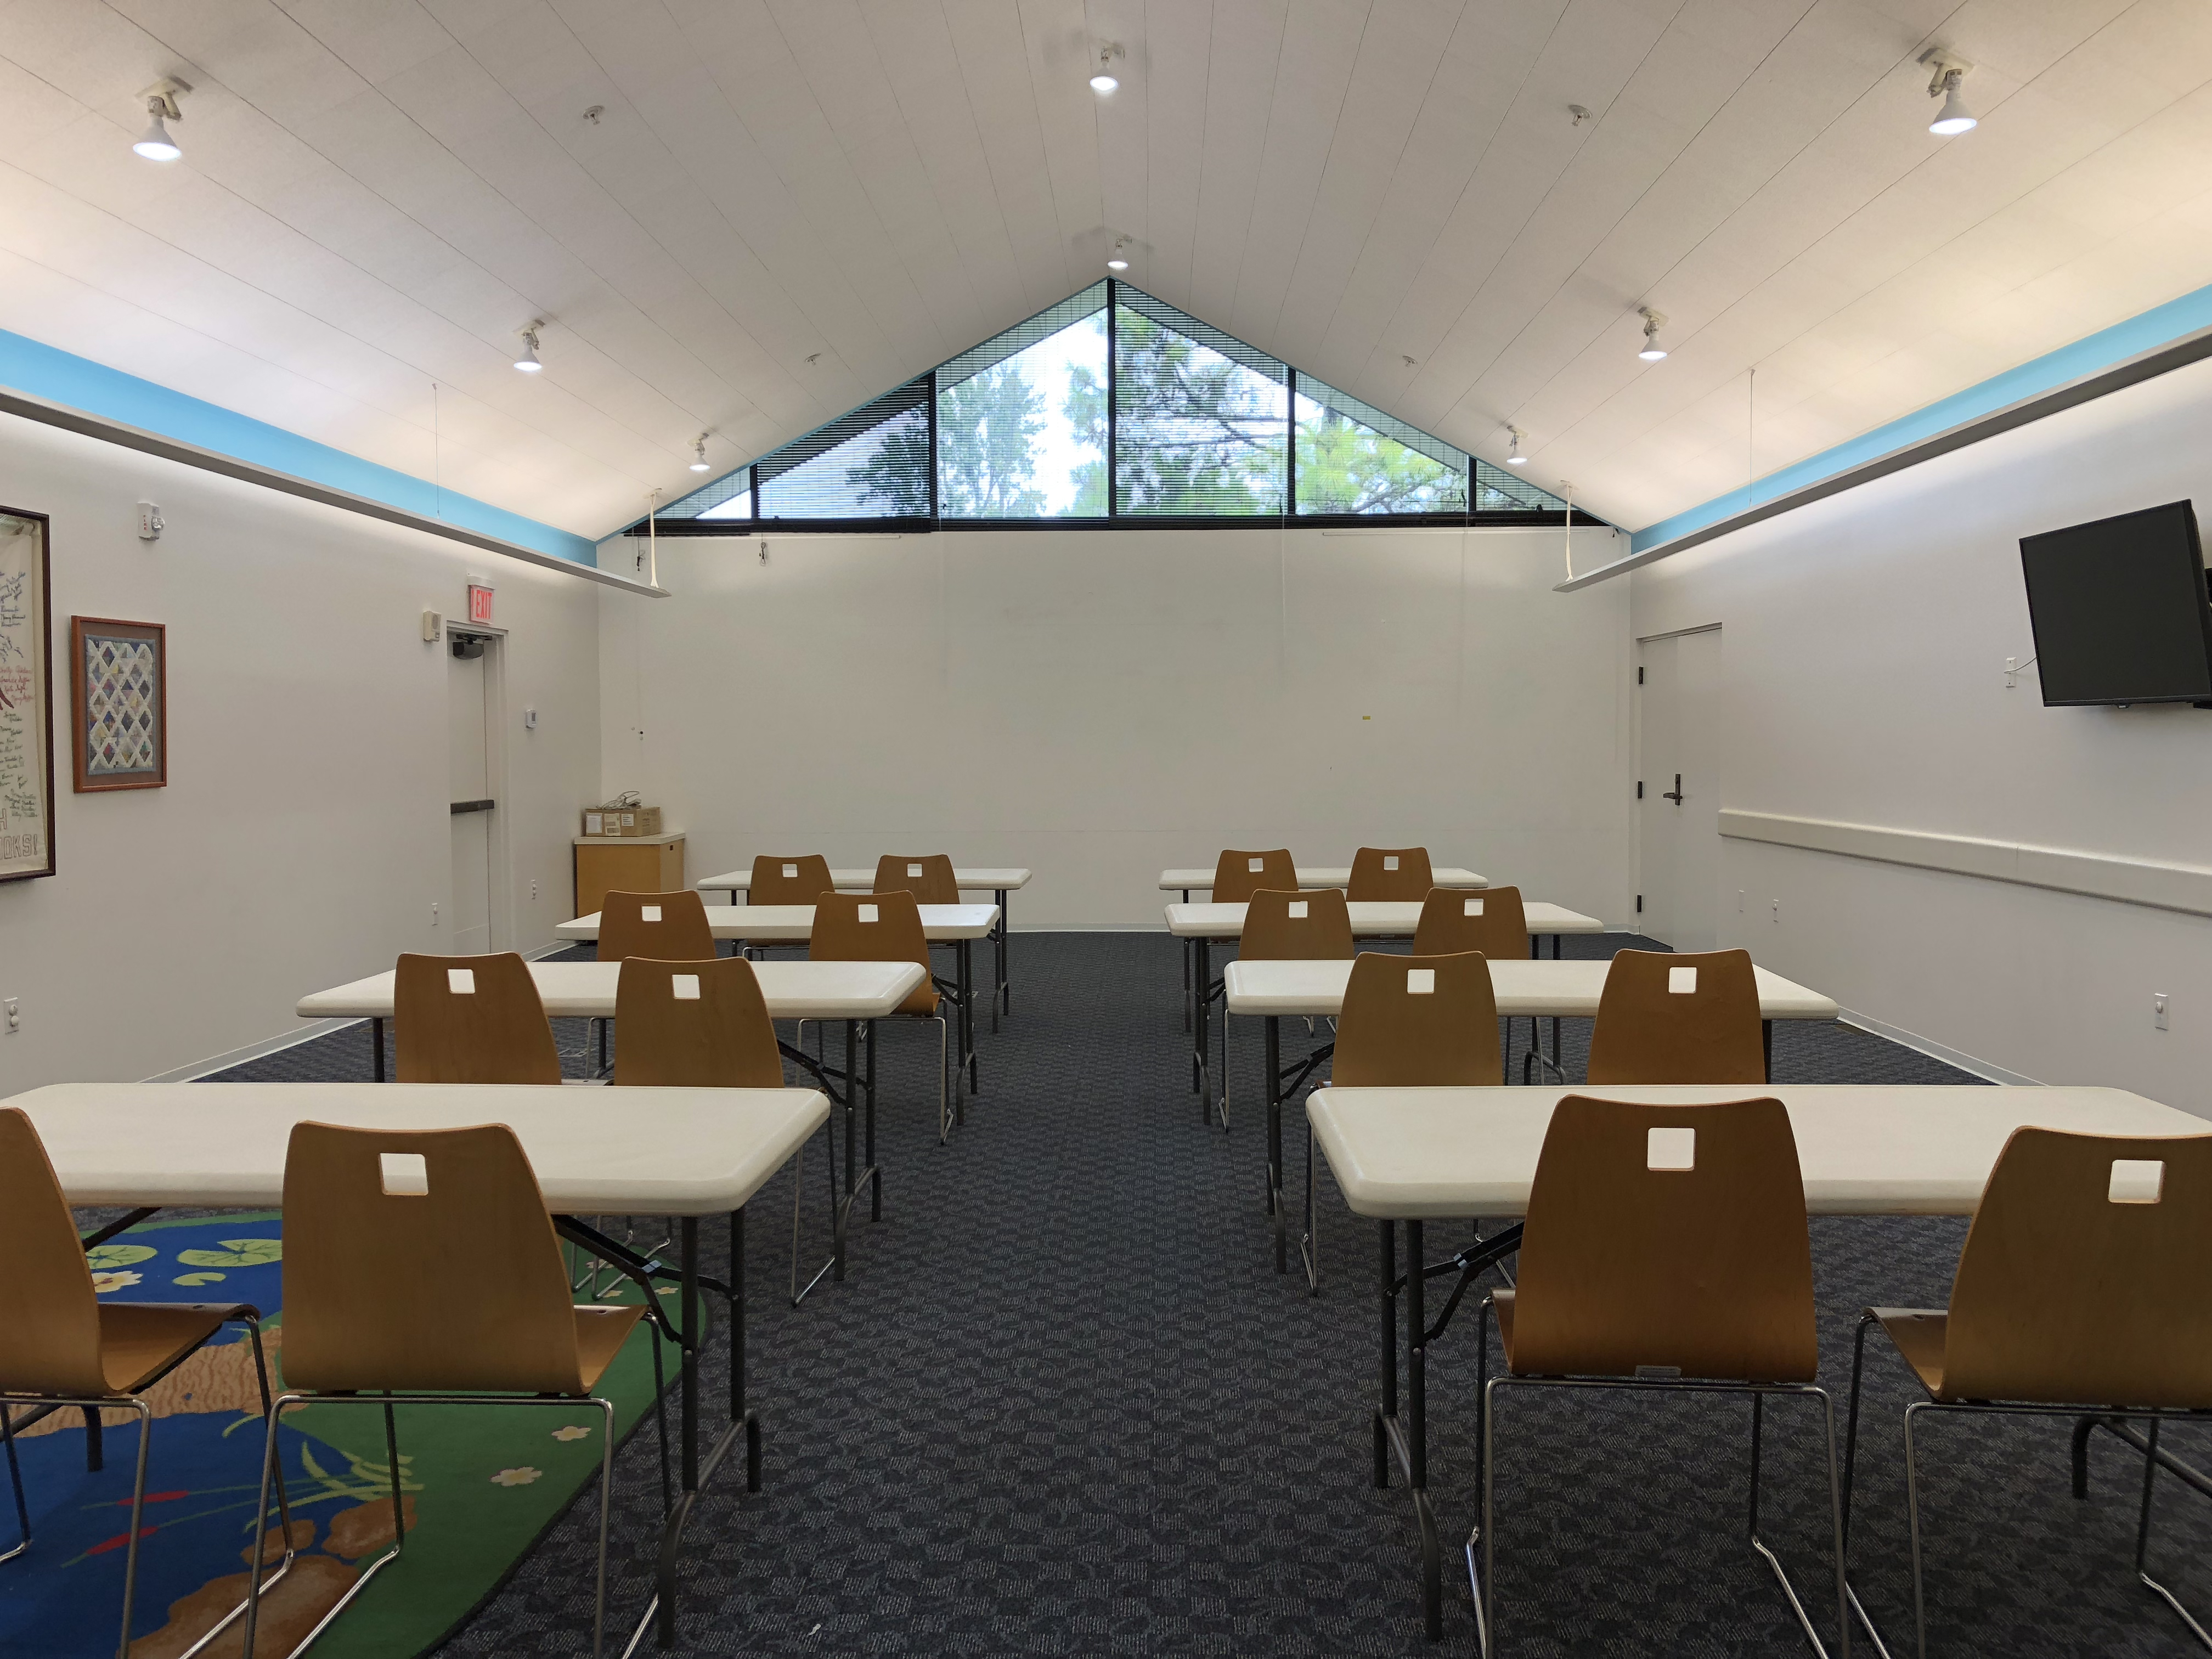 Choctaw meeting room with classroom style setup